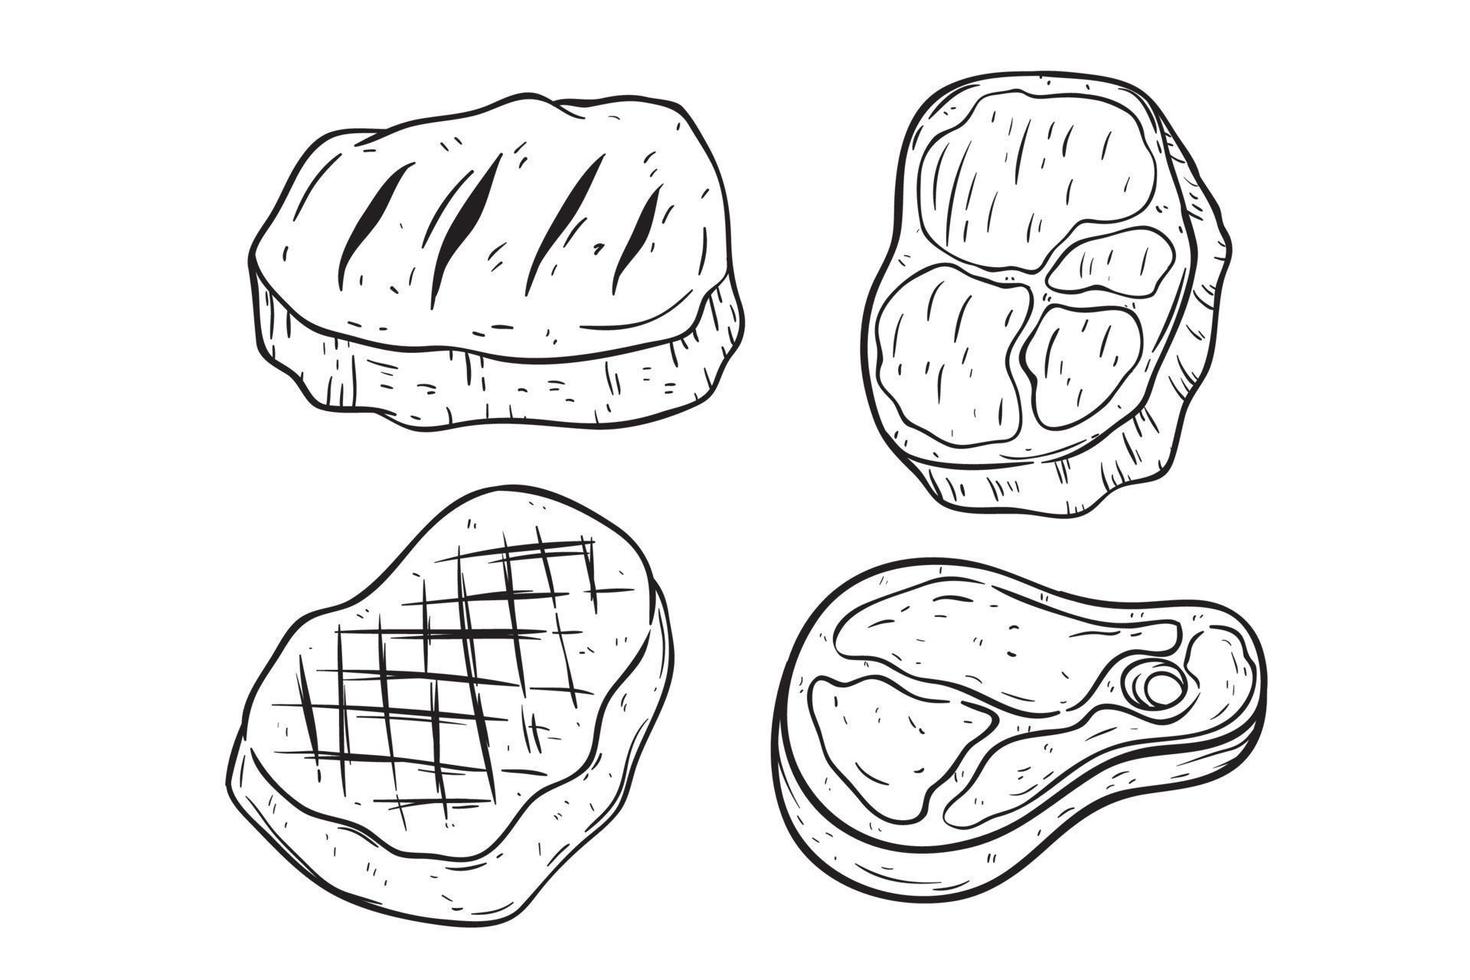 set of hand drawing meat or steak on white background vector